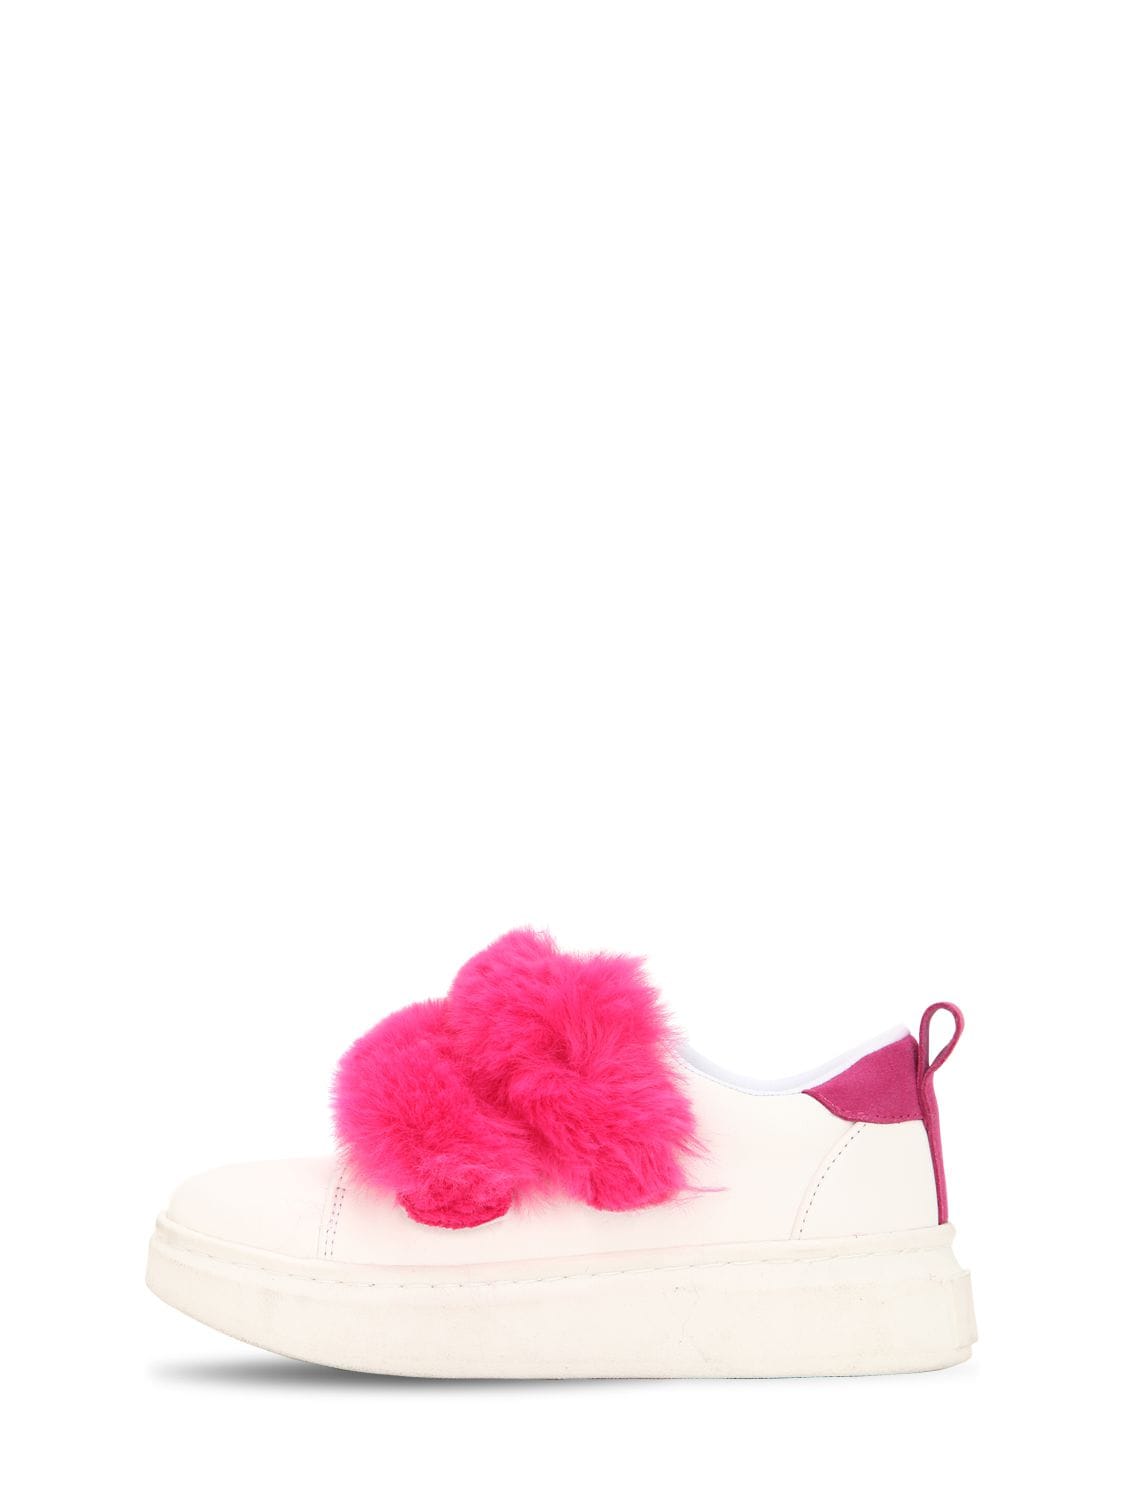 Colors Of California Kids' Faux Leather Strap Sneakers W/ Faux Fur In White,fuchsia